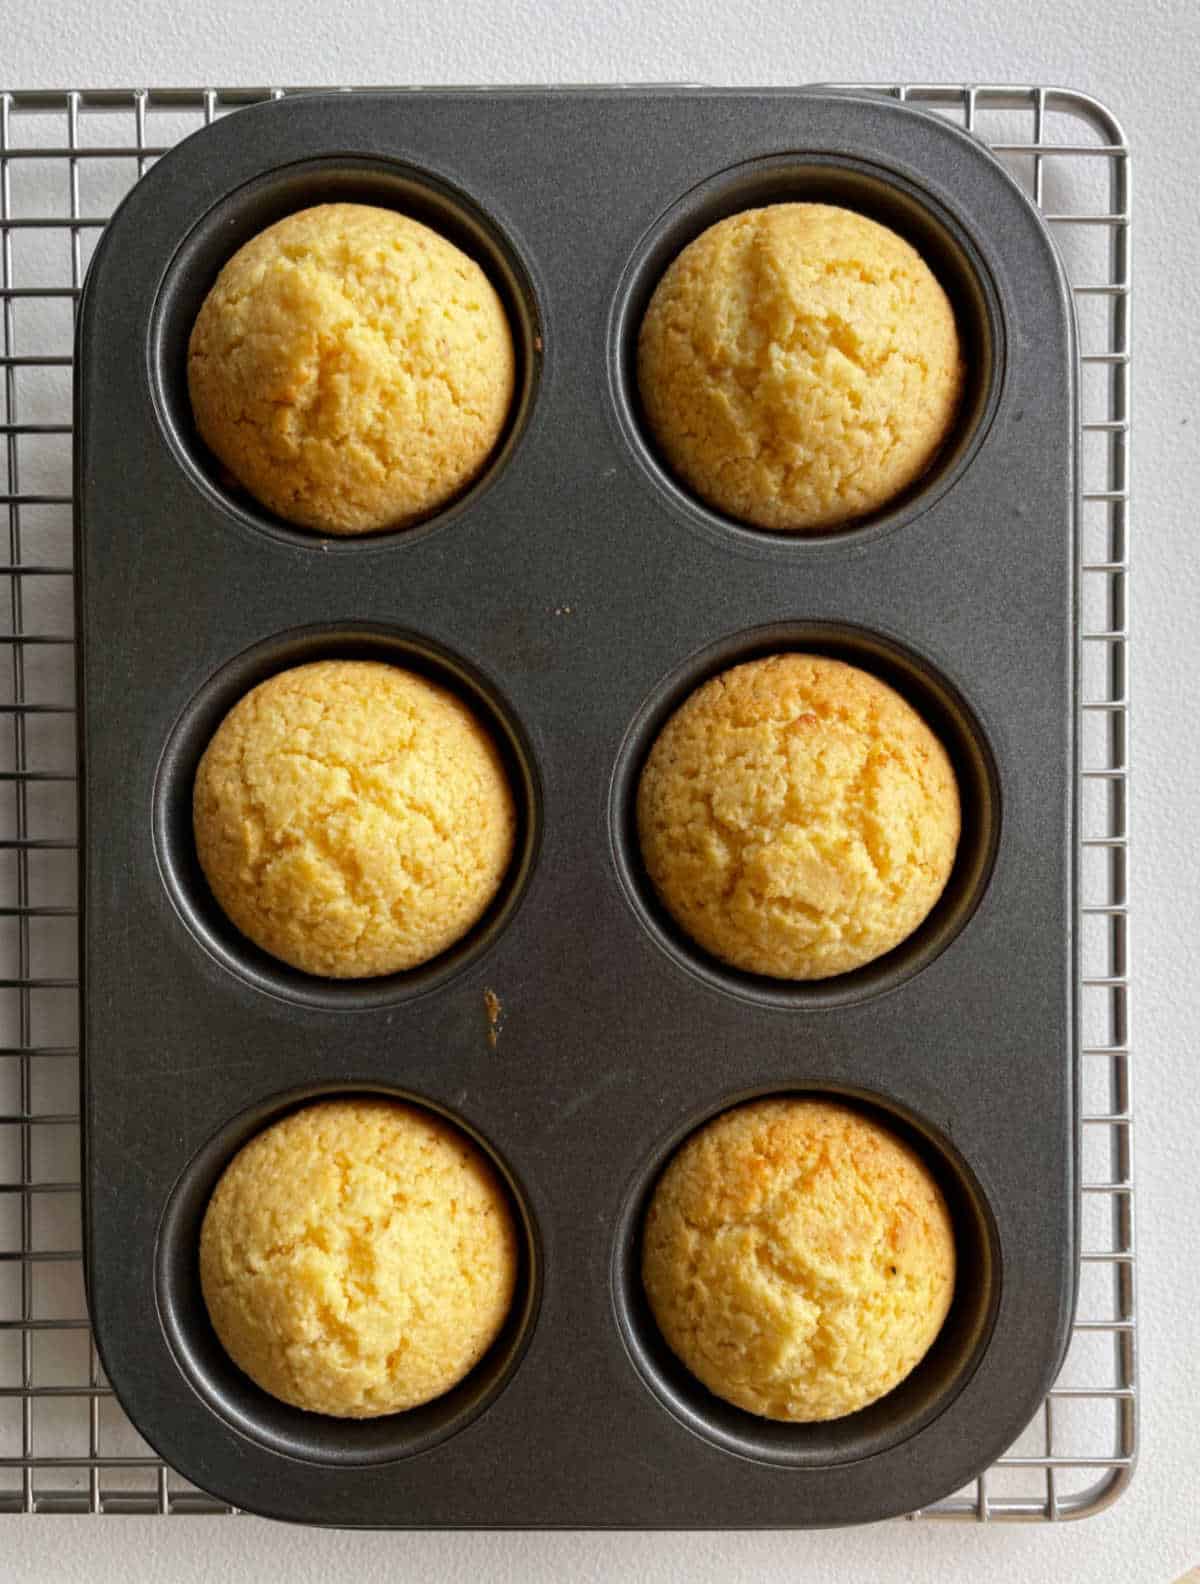 Top view of baked cornbread muffins in a dark metal muffin tin.